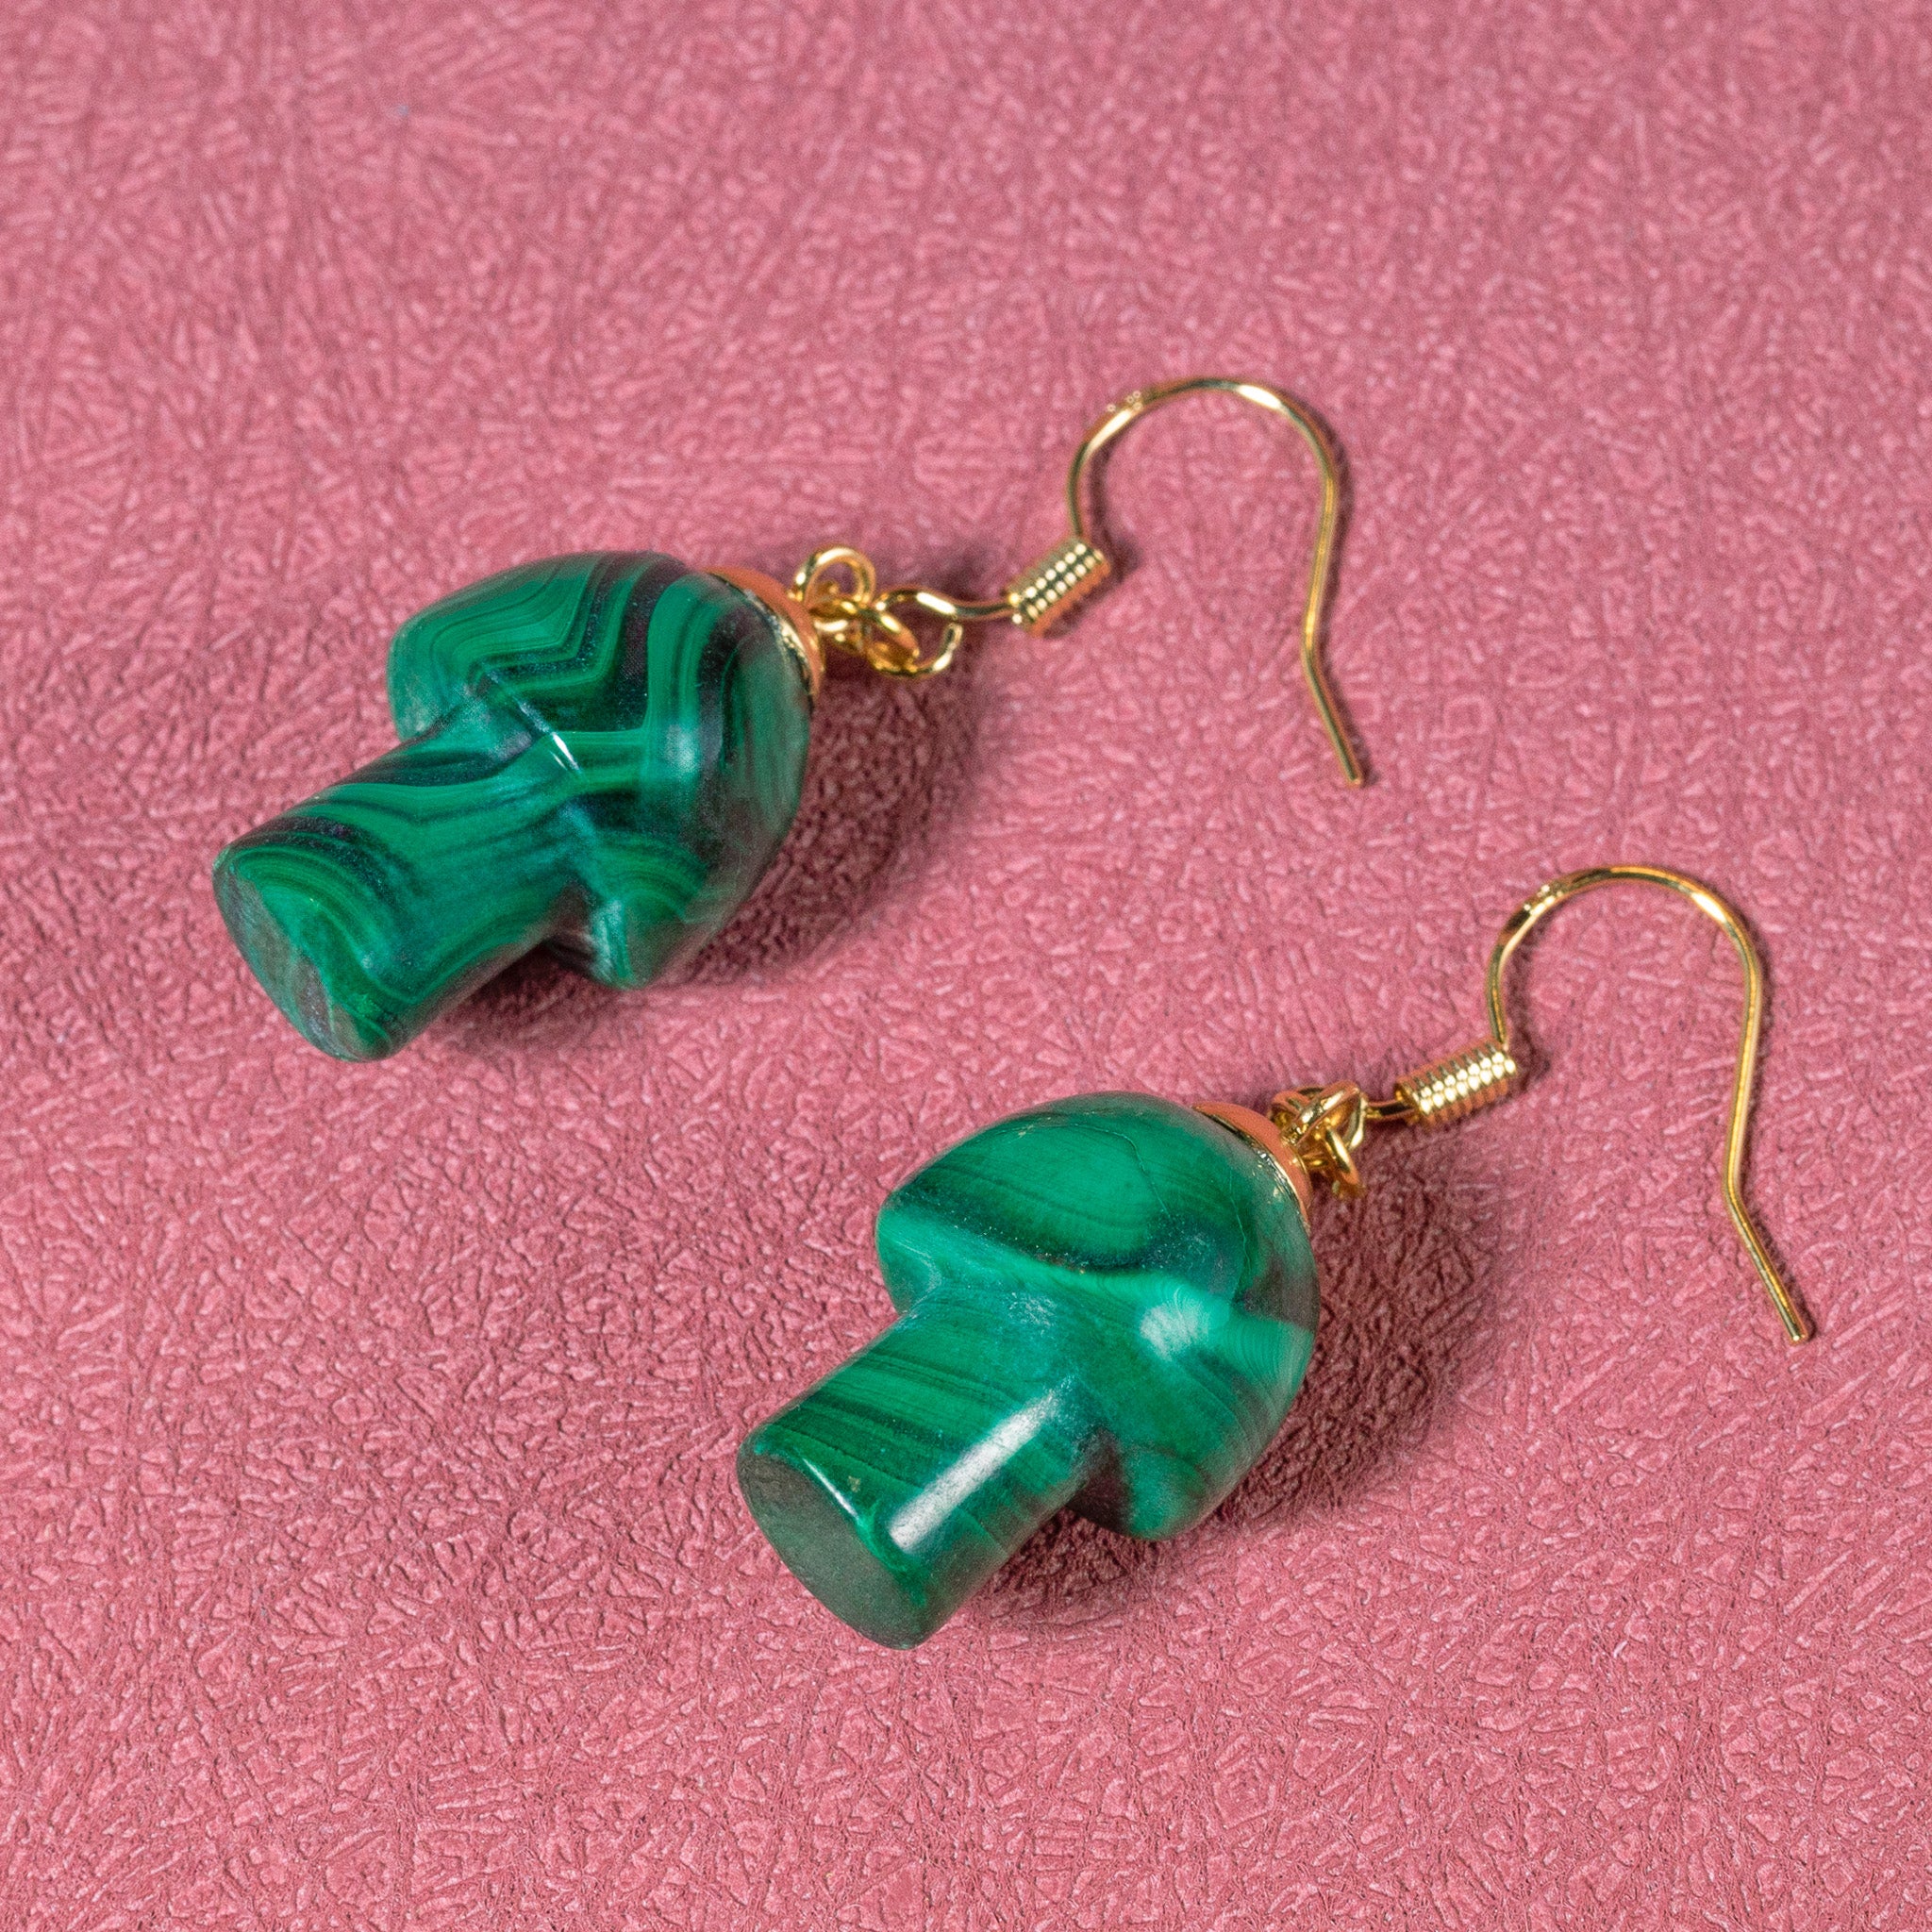 a pair of green earrings sitting on top of a pink surface